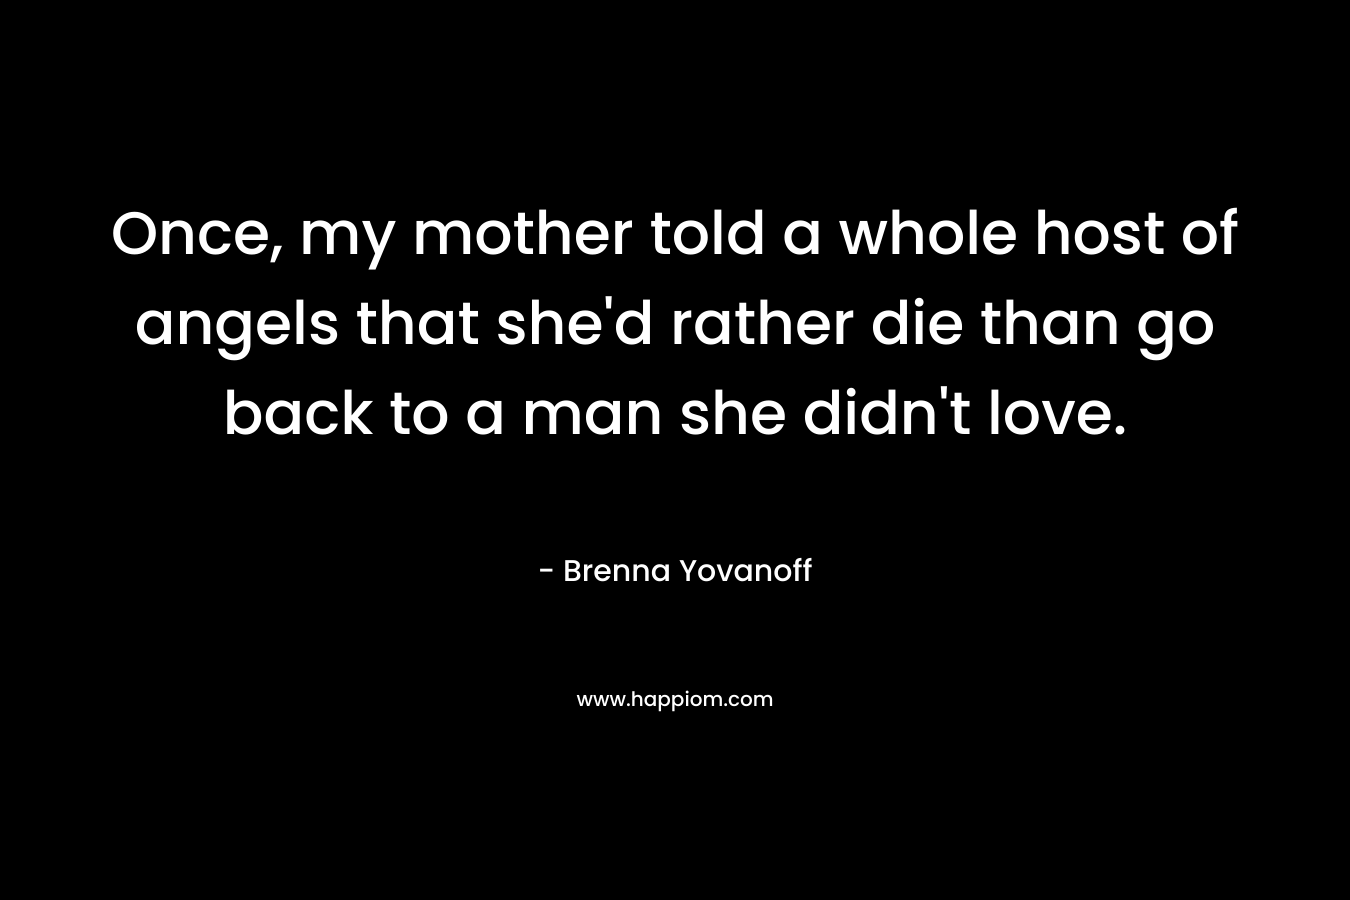 Once, my mother told a whole host of angels that she'd rather die than go back to a man she didn't love.